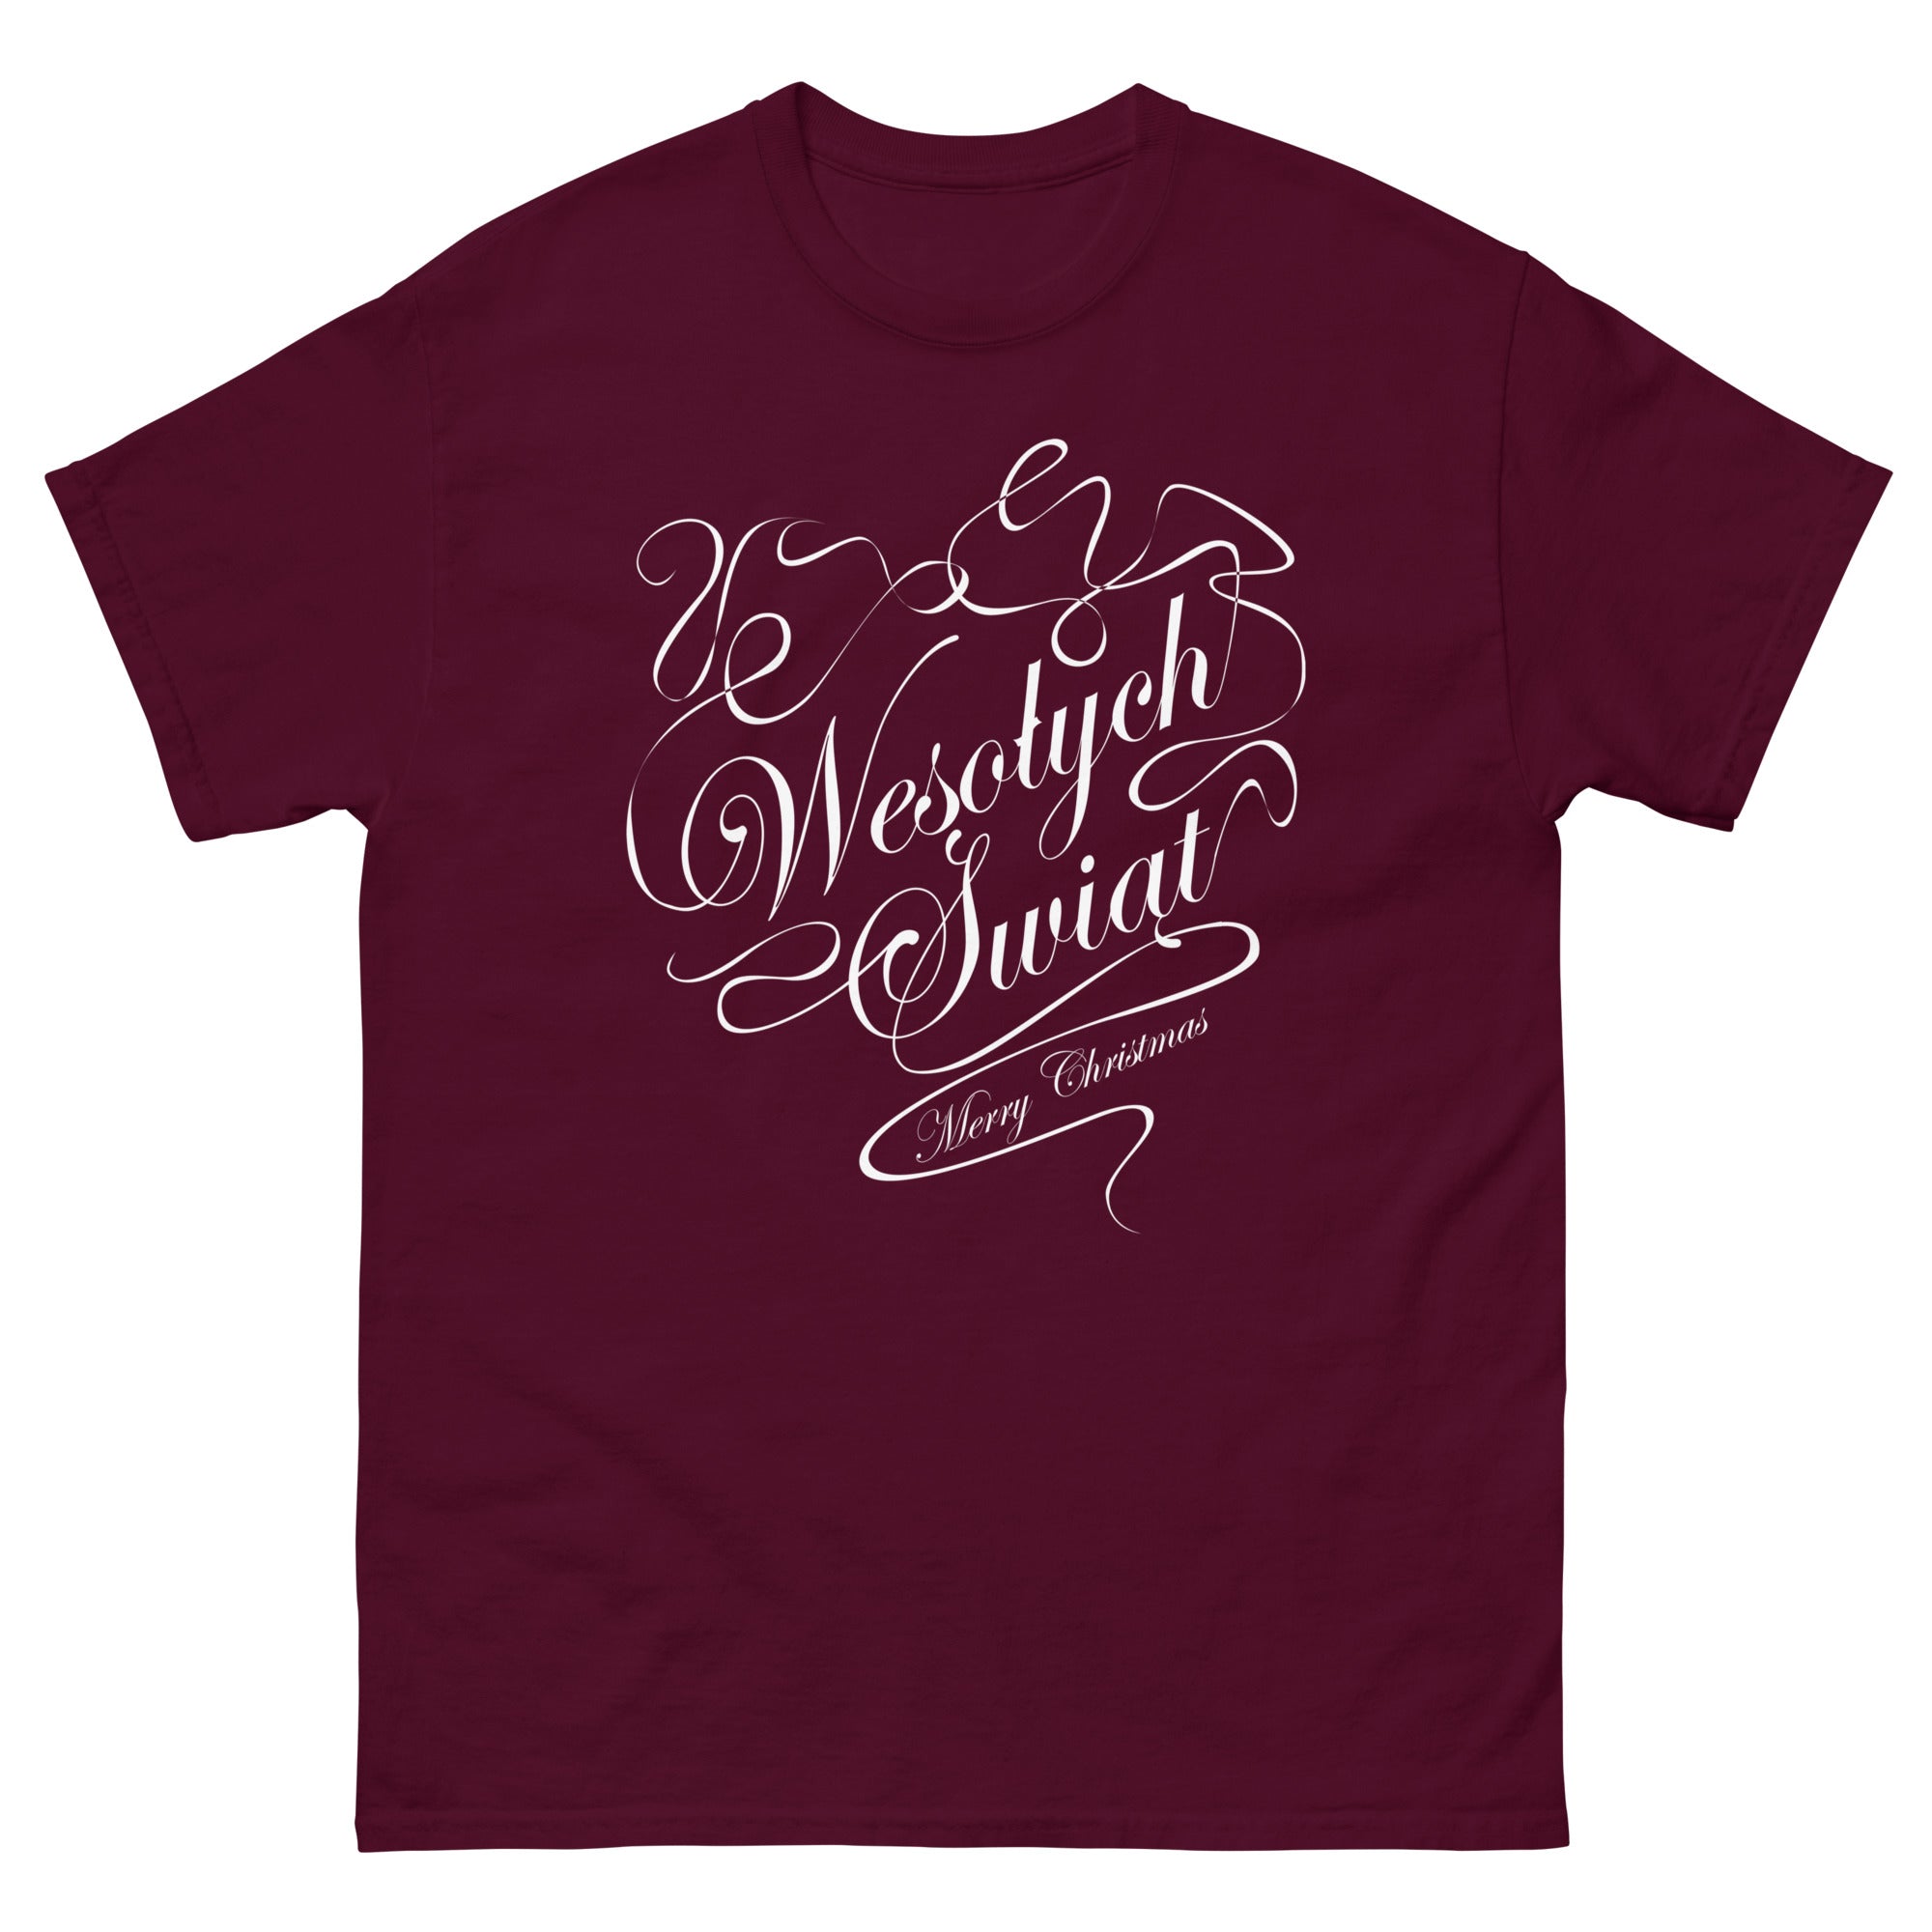 Wesolych Swiat - Merry Christmas Men's classic tee